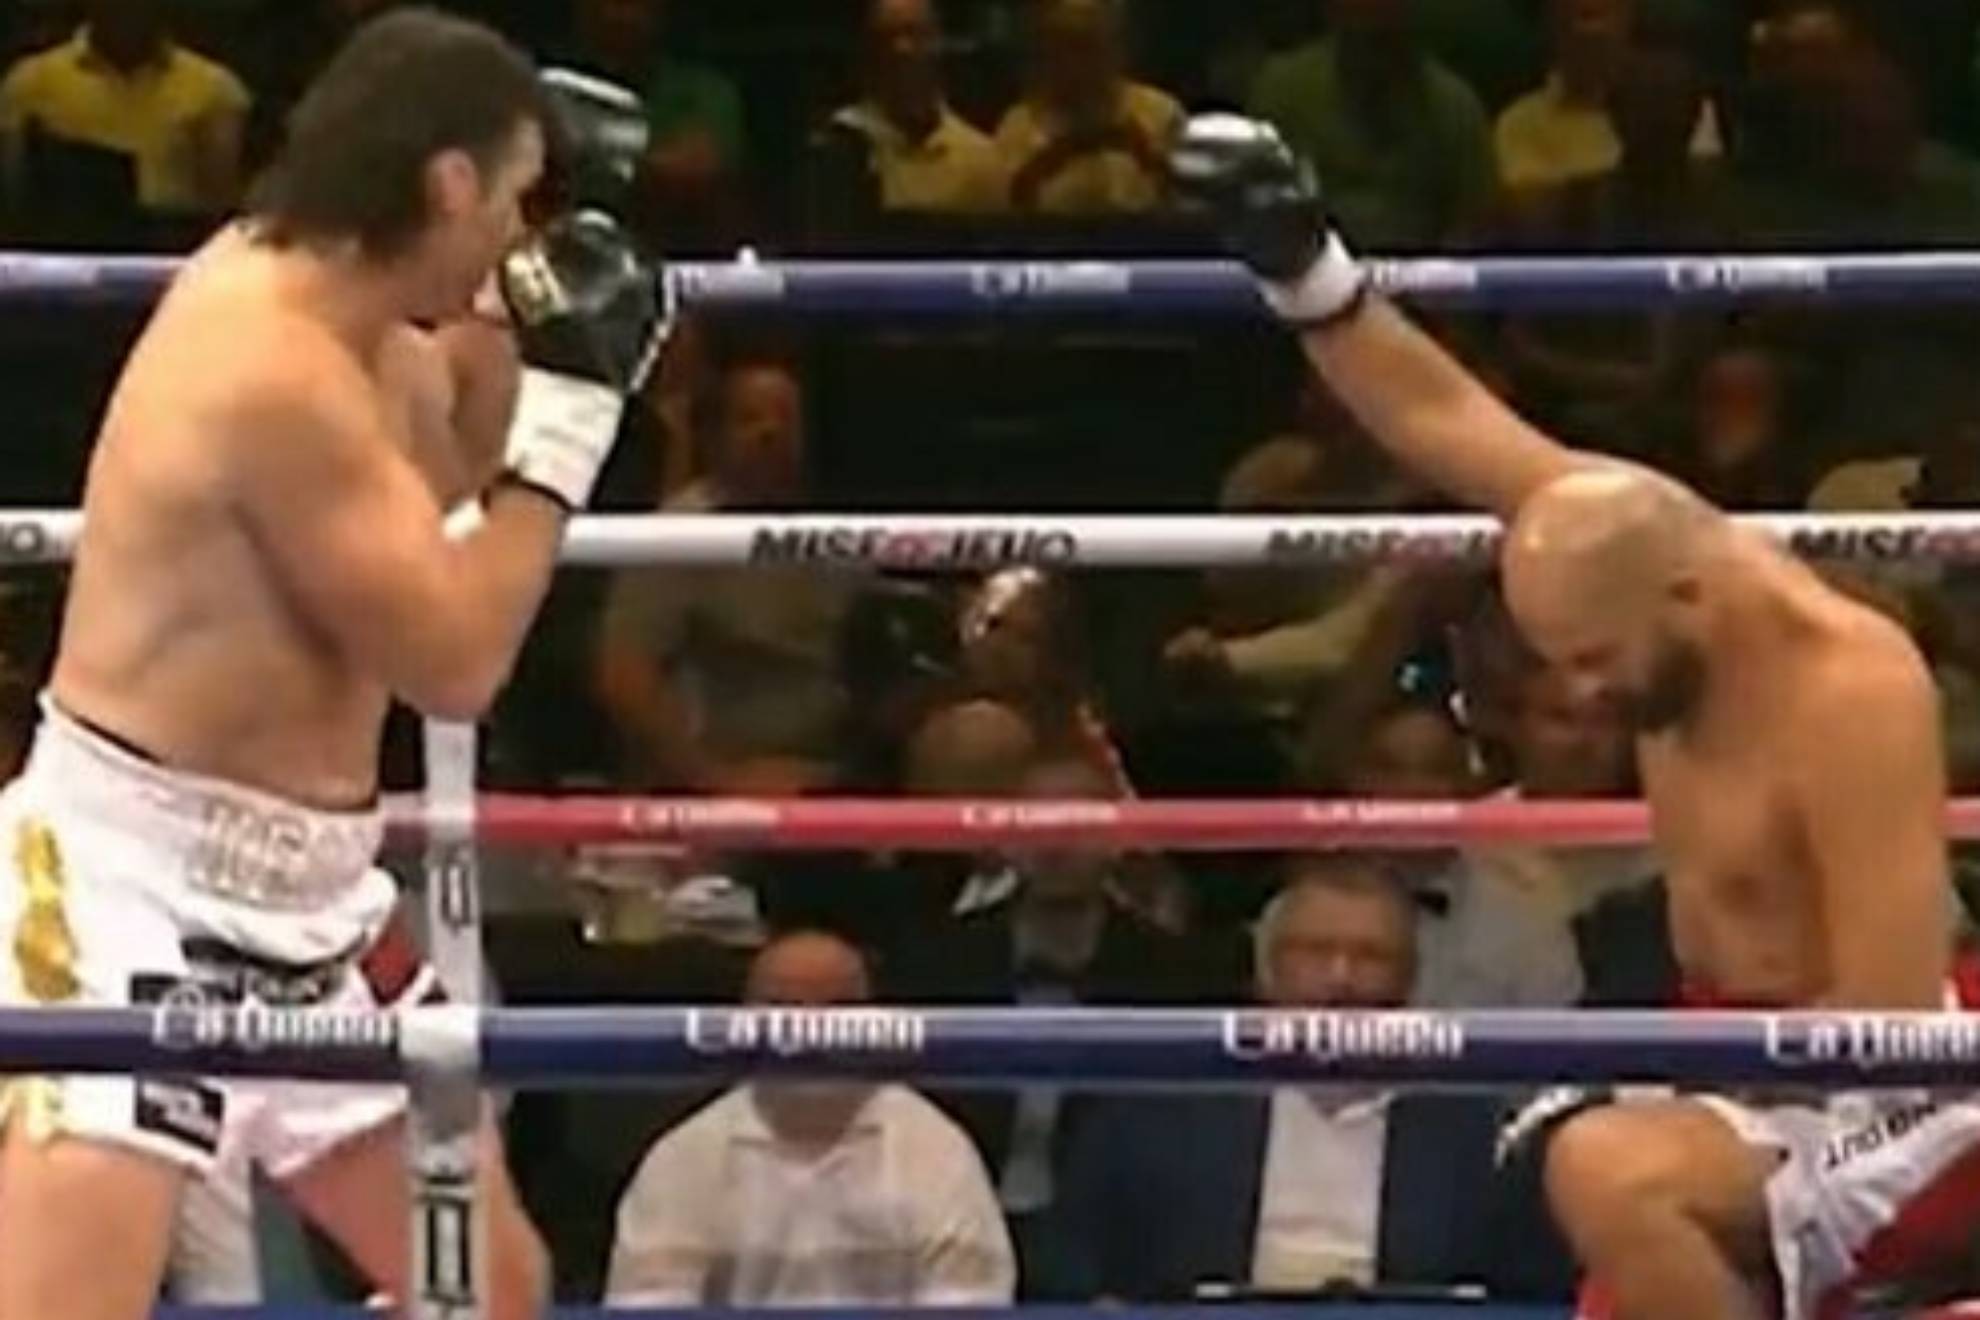 Why did Karim Benzema's boxing cousin, Newfel Ouatah, take a knee in protest during a fight?